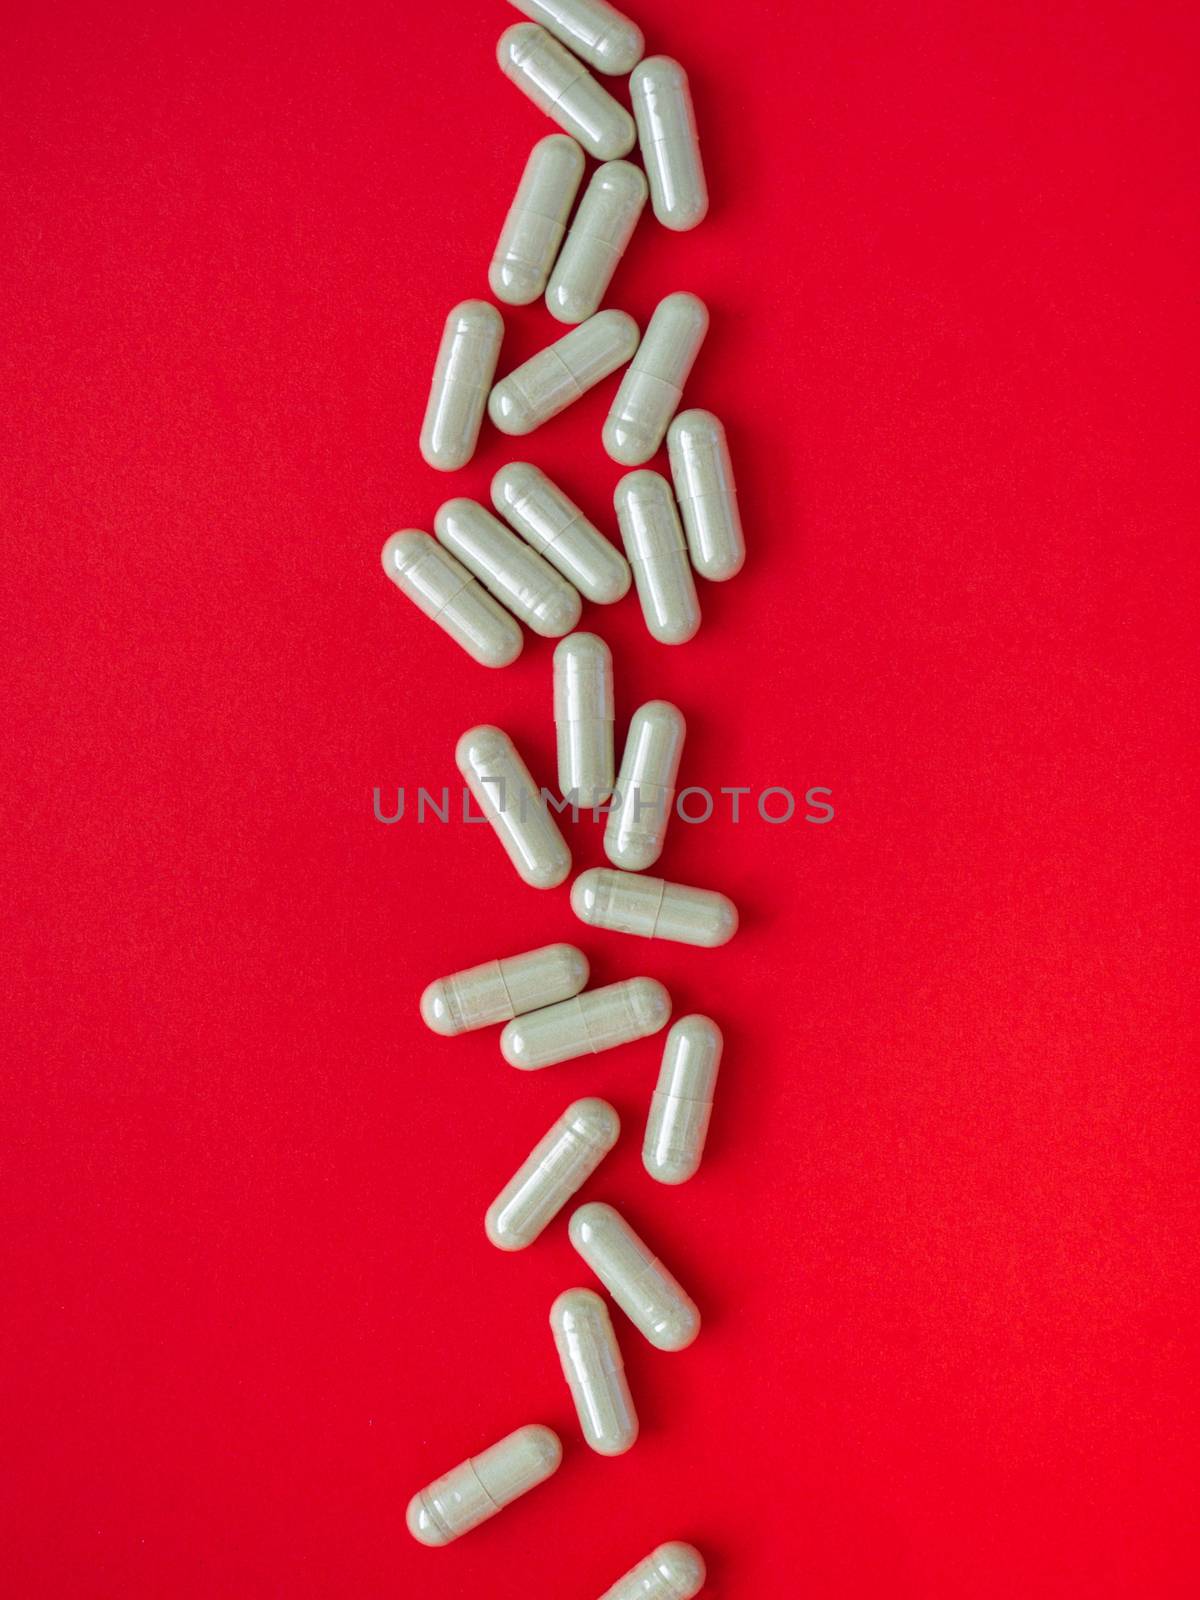 Gray pills for the treatment of body disorders are arranged on a red background